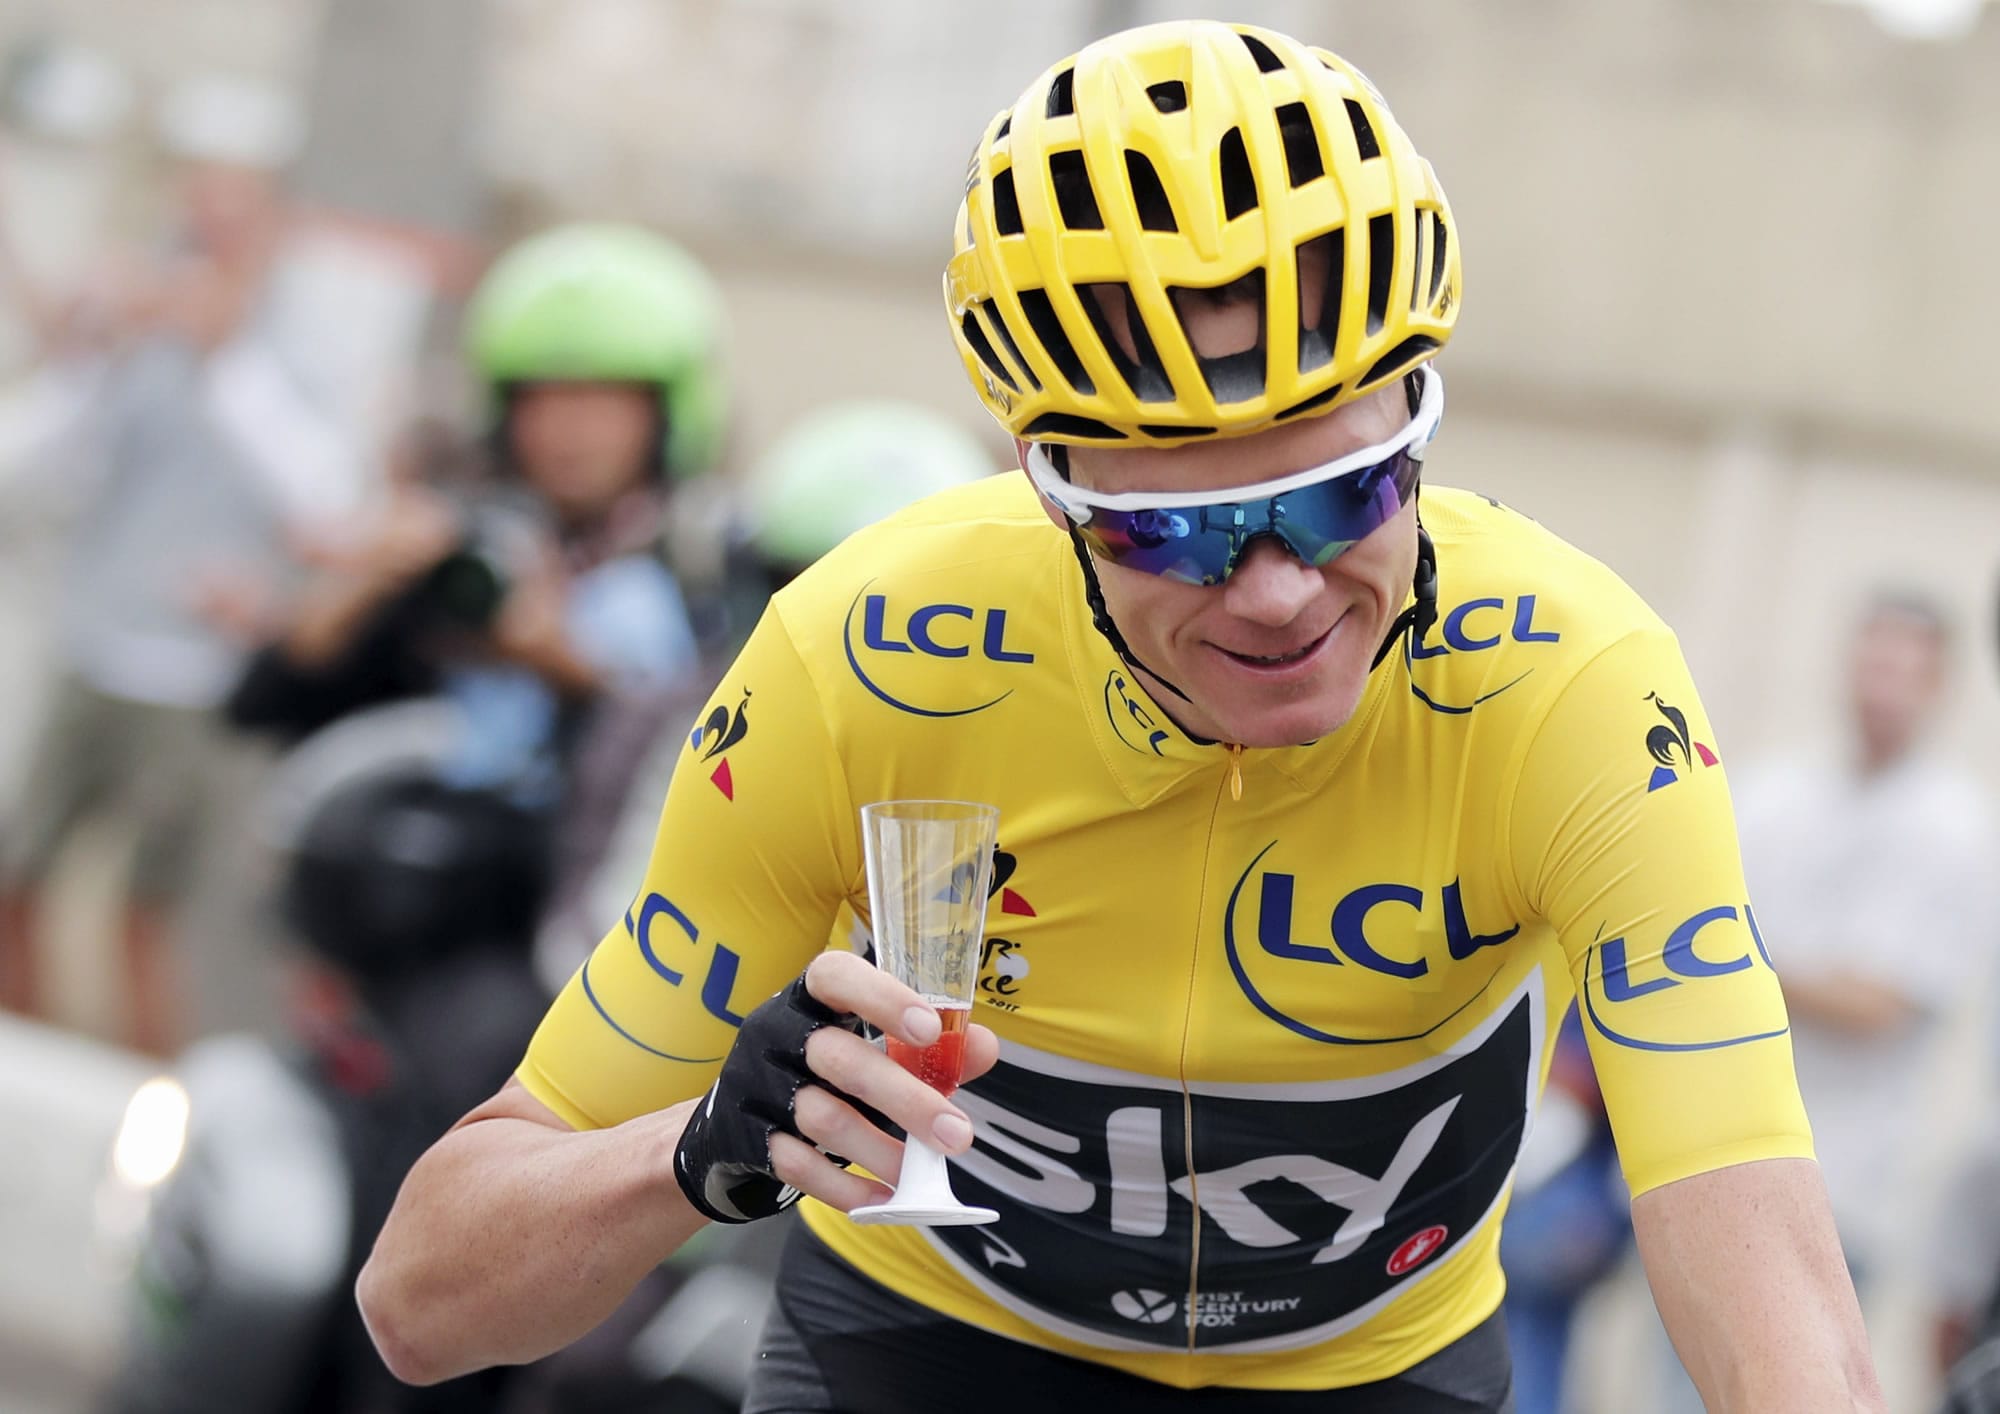 Britain's Chris Froome, wearing the overall leader's yellow jersey celebrates his overall victory during the final stage of the Tour de France cycling race over 103 kilometers (64 miles) with start in Montgeron and finish in Paris, France, Sunday, July 23, 2017.